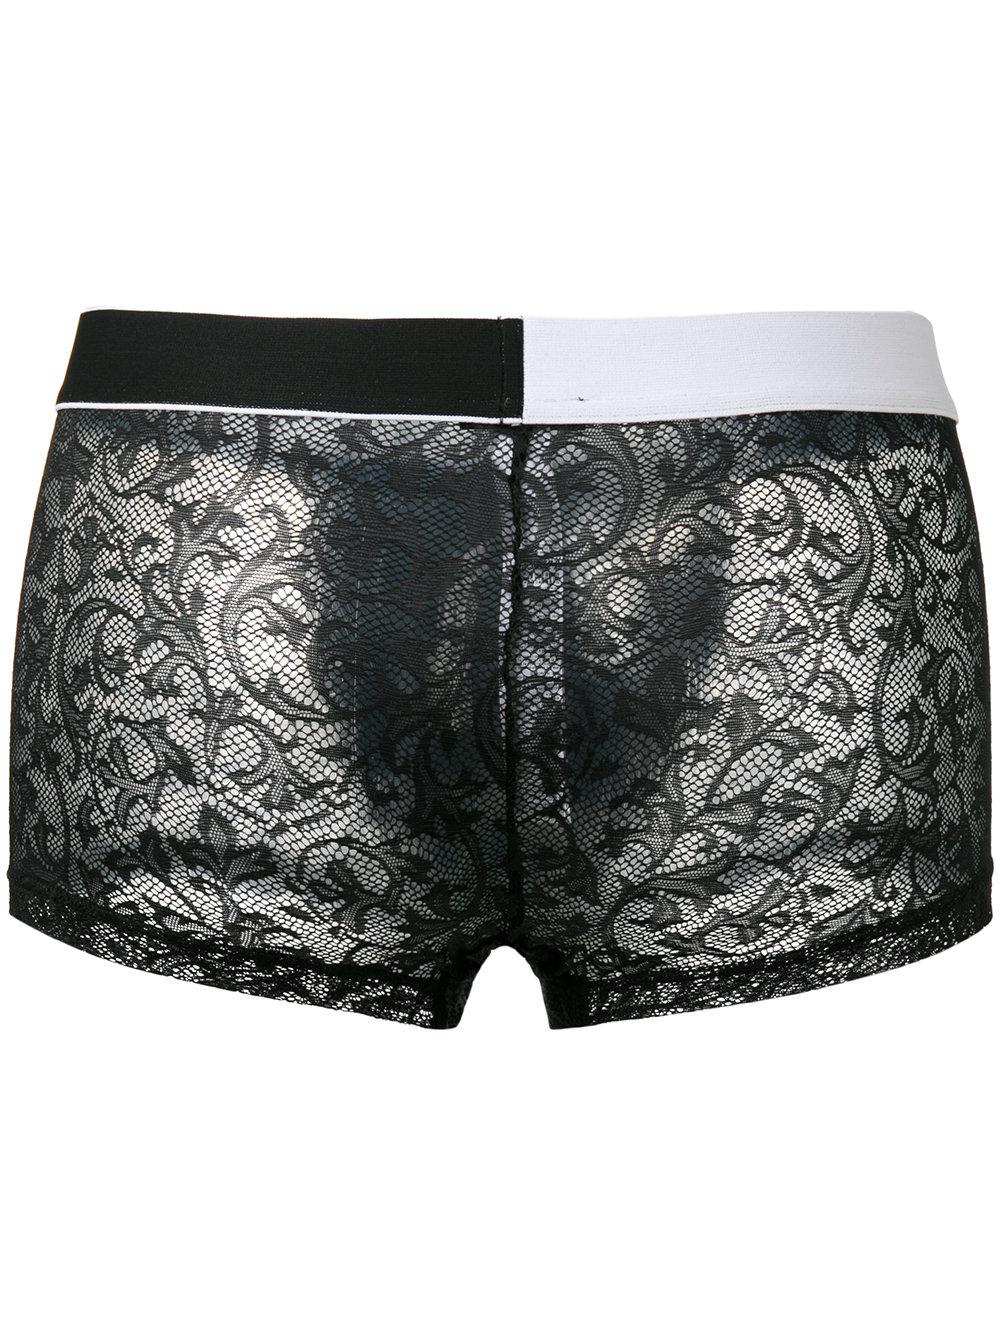 Versace Lace Logo Waistband Boxer Shorts in Black for Men - Lyst